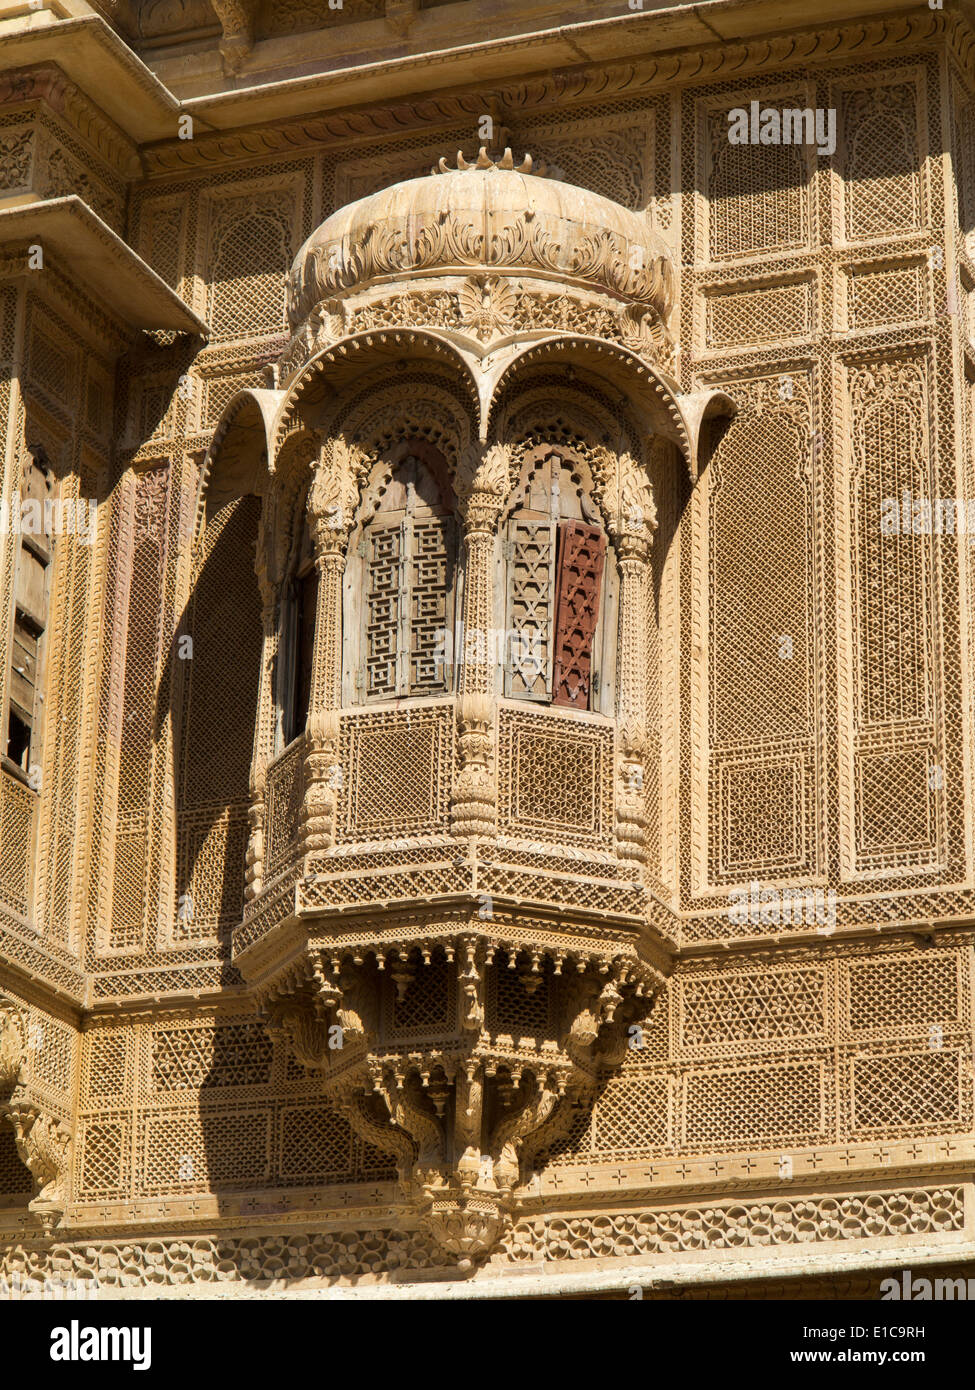 India, Rajasthan, Jaisalmer, Patwon Ki Haveli carved sandstone projecting window balcony with wooden shutters Stock Photo